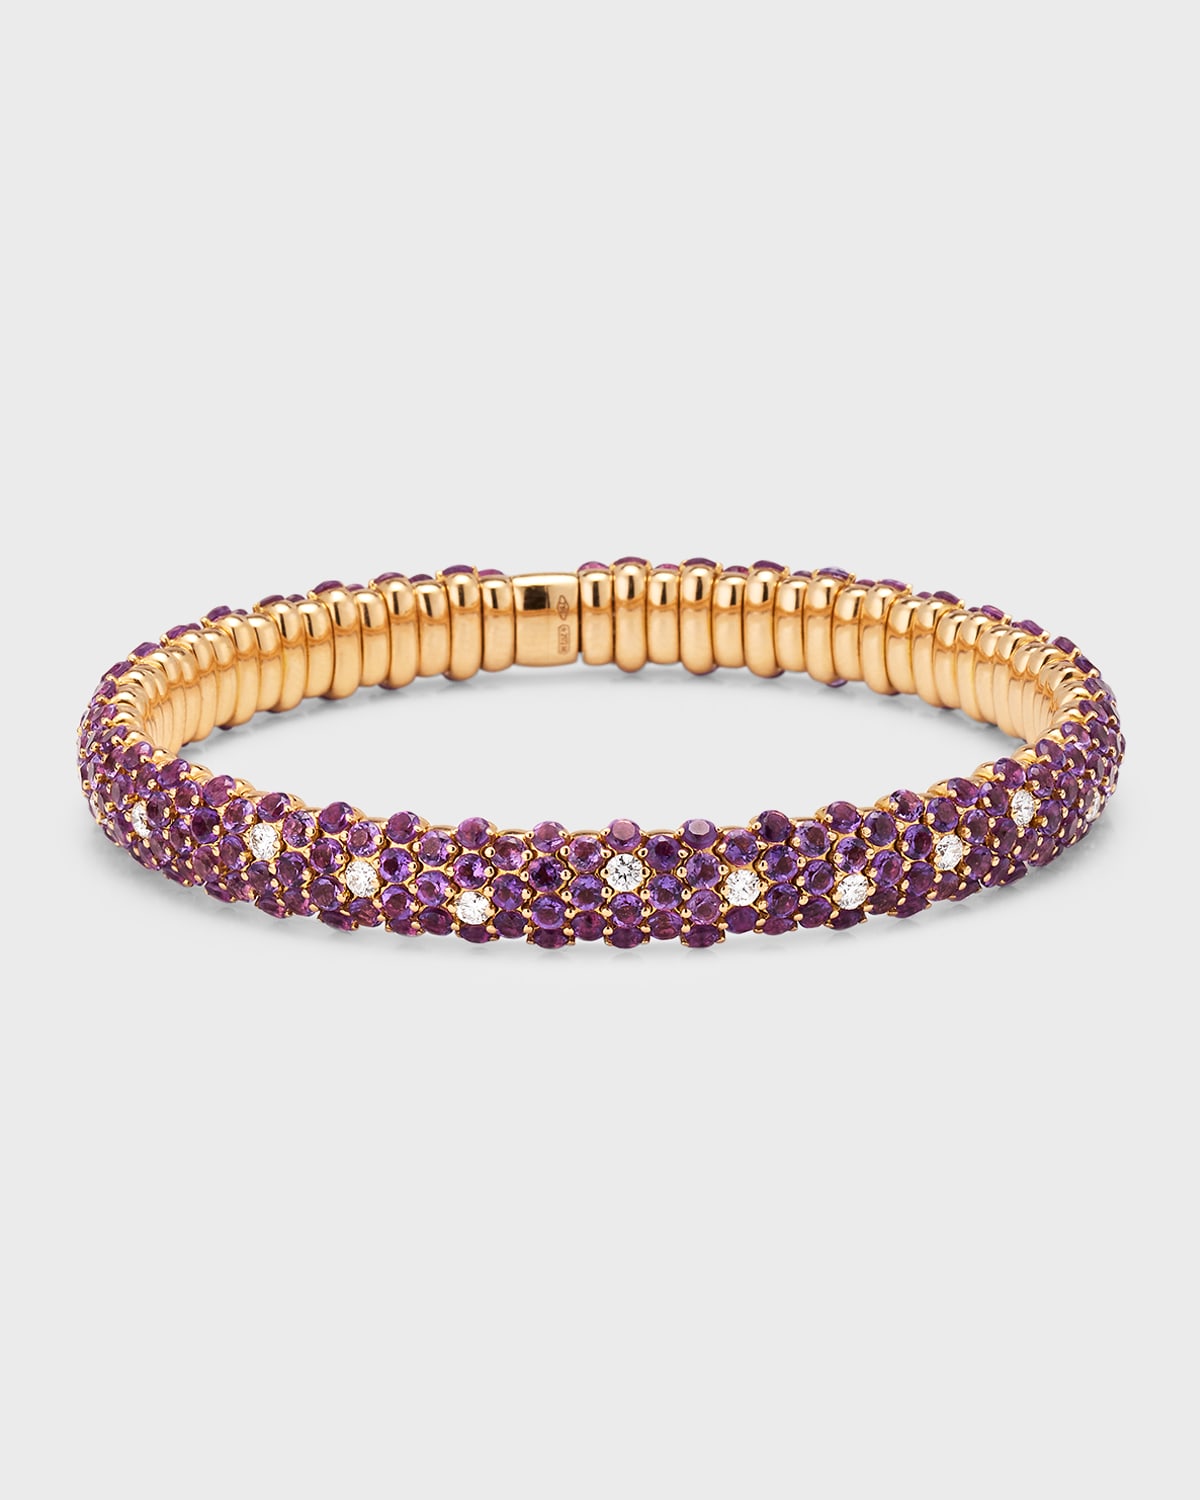 Zydo 18k Rose Gold Bracelet With Diamonds And Amethyst In Purple